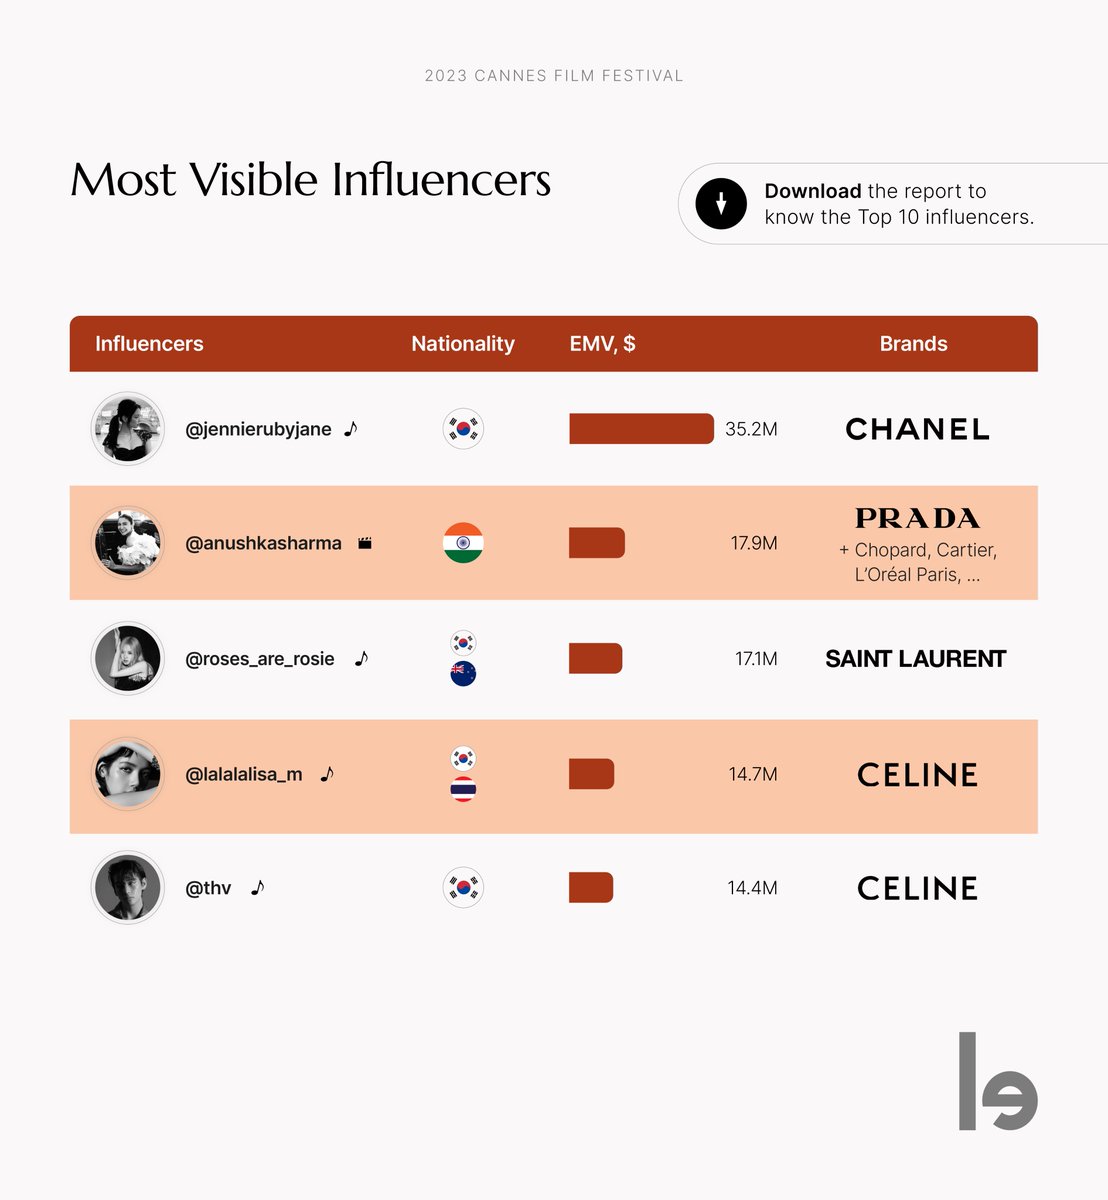 Who are the most visible influencers in the #CannesFilmFestival2023? 

🥇#BLACKPINK / #JENNIE
🥈#anushukarma
🥉#BLACKPINK / #ROSE
🏆#BLACKPINK / #LISA
🏆#thv

Download report to know the Top 10 influencers: lefty.io/industry-repor…